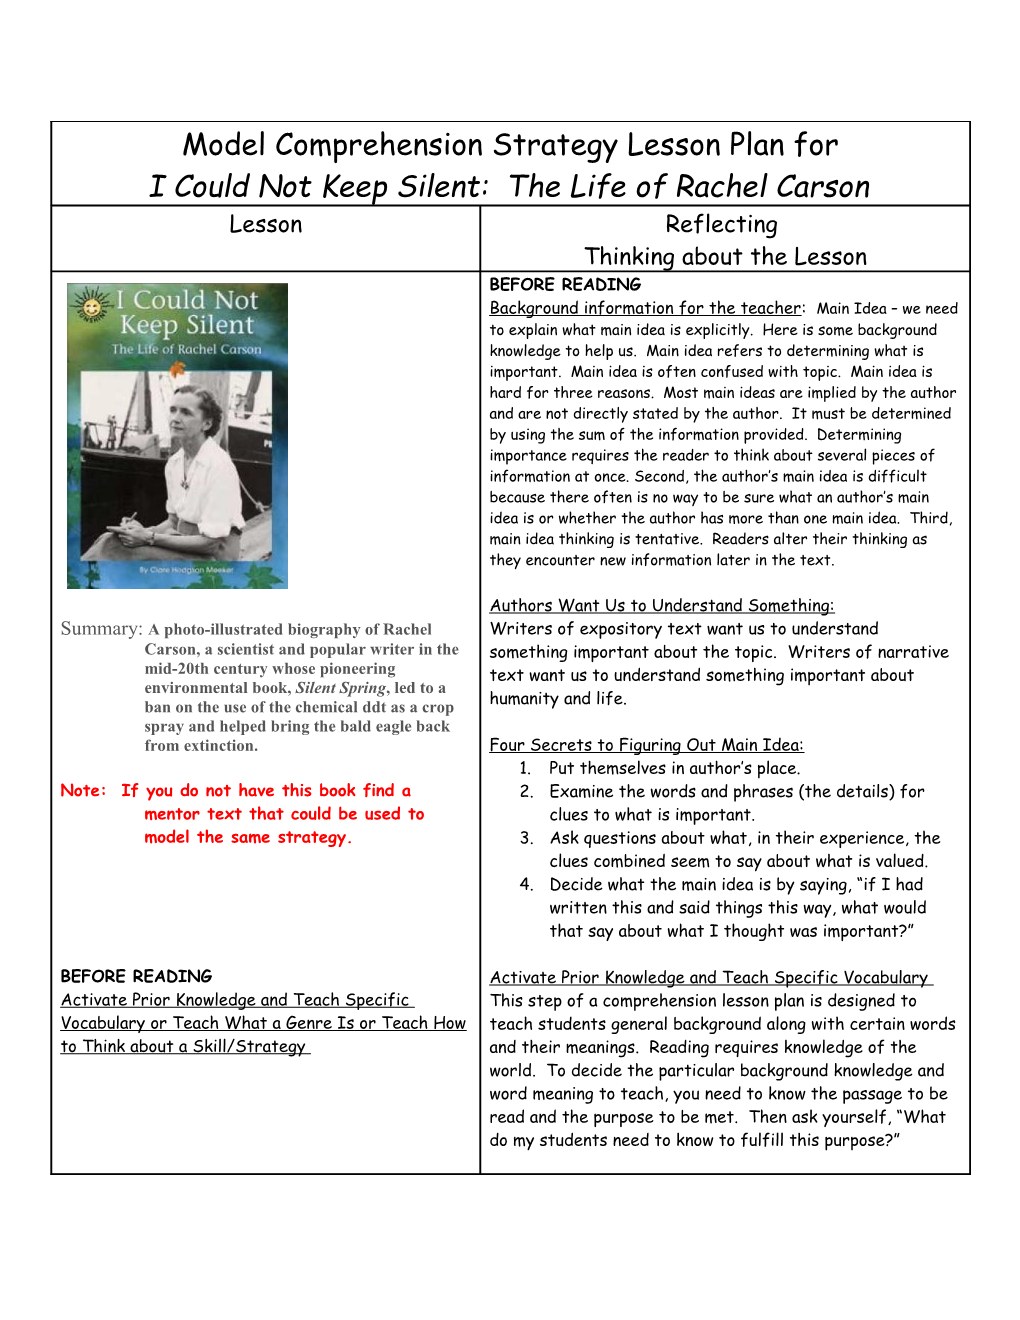 Model Comprehension Strategy Lesson Plan For